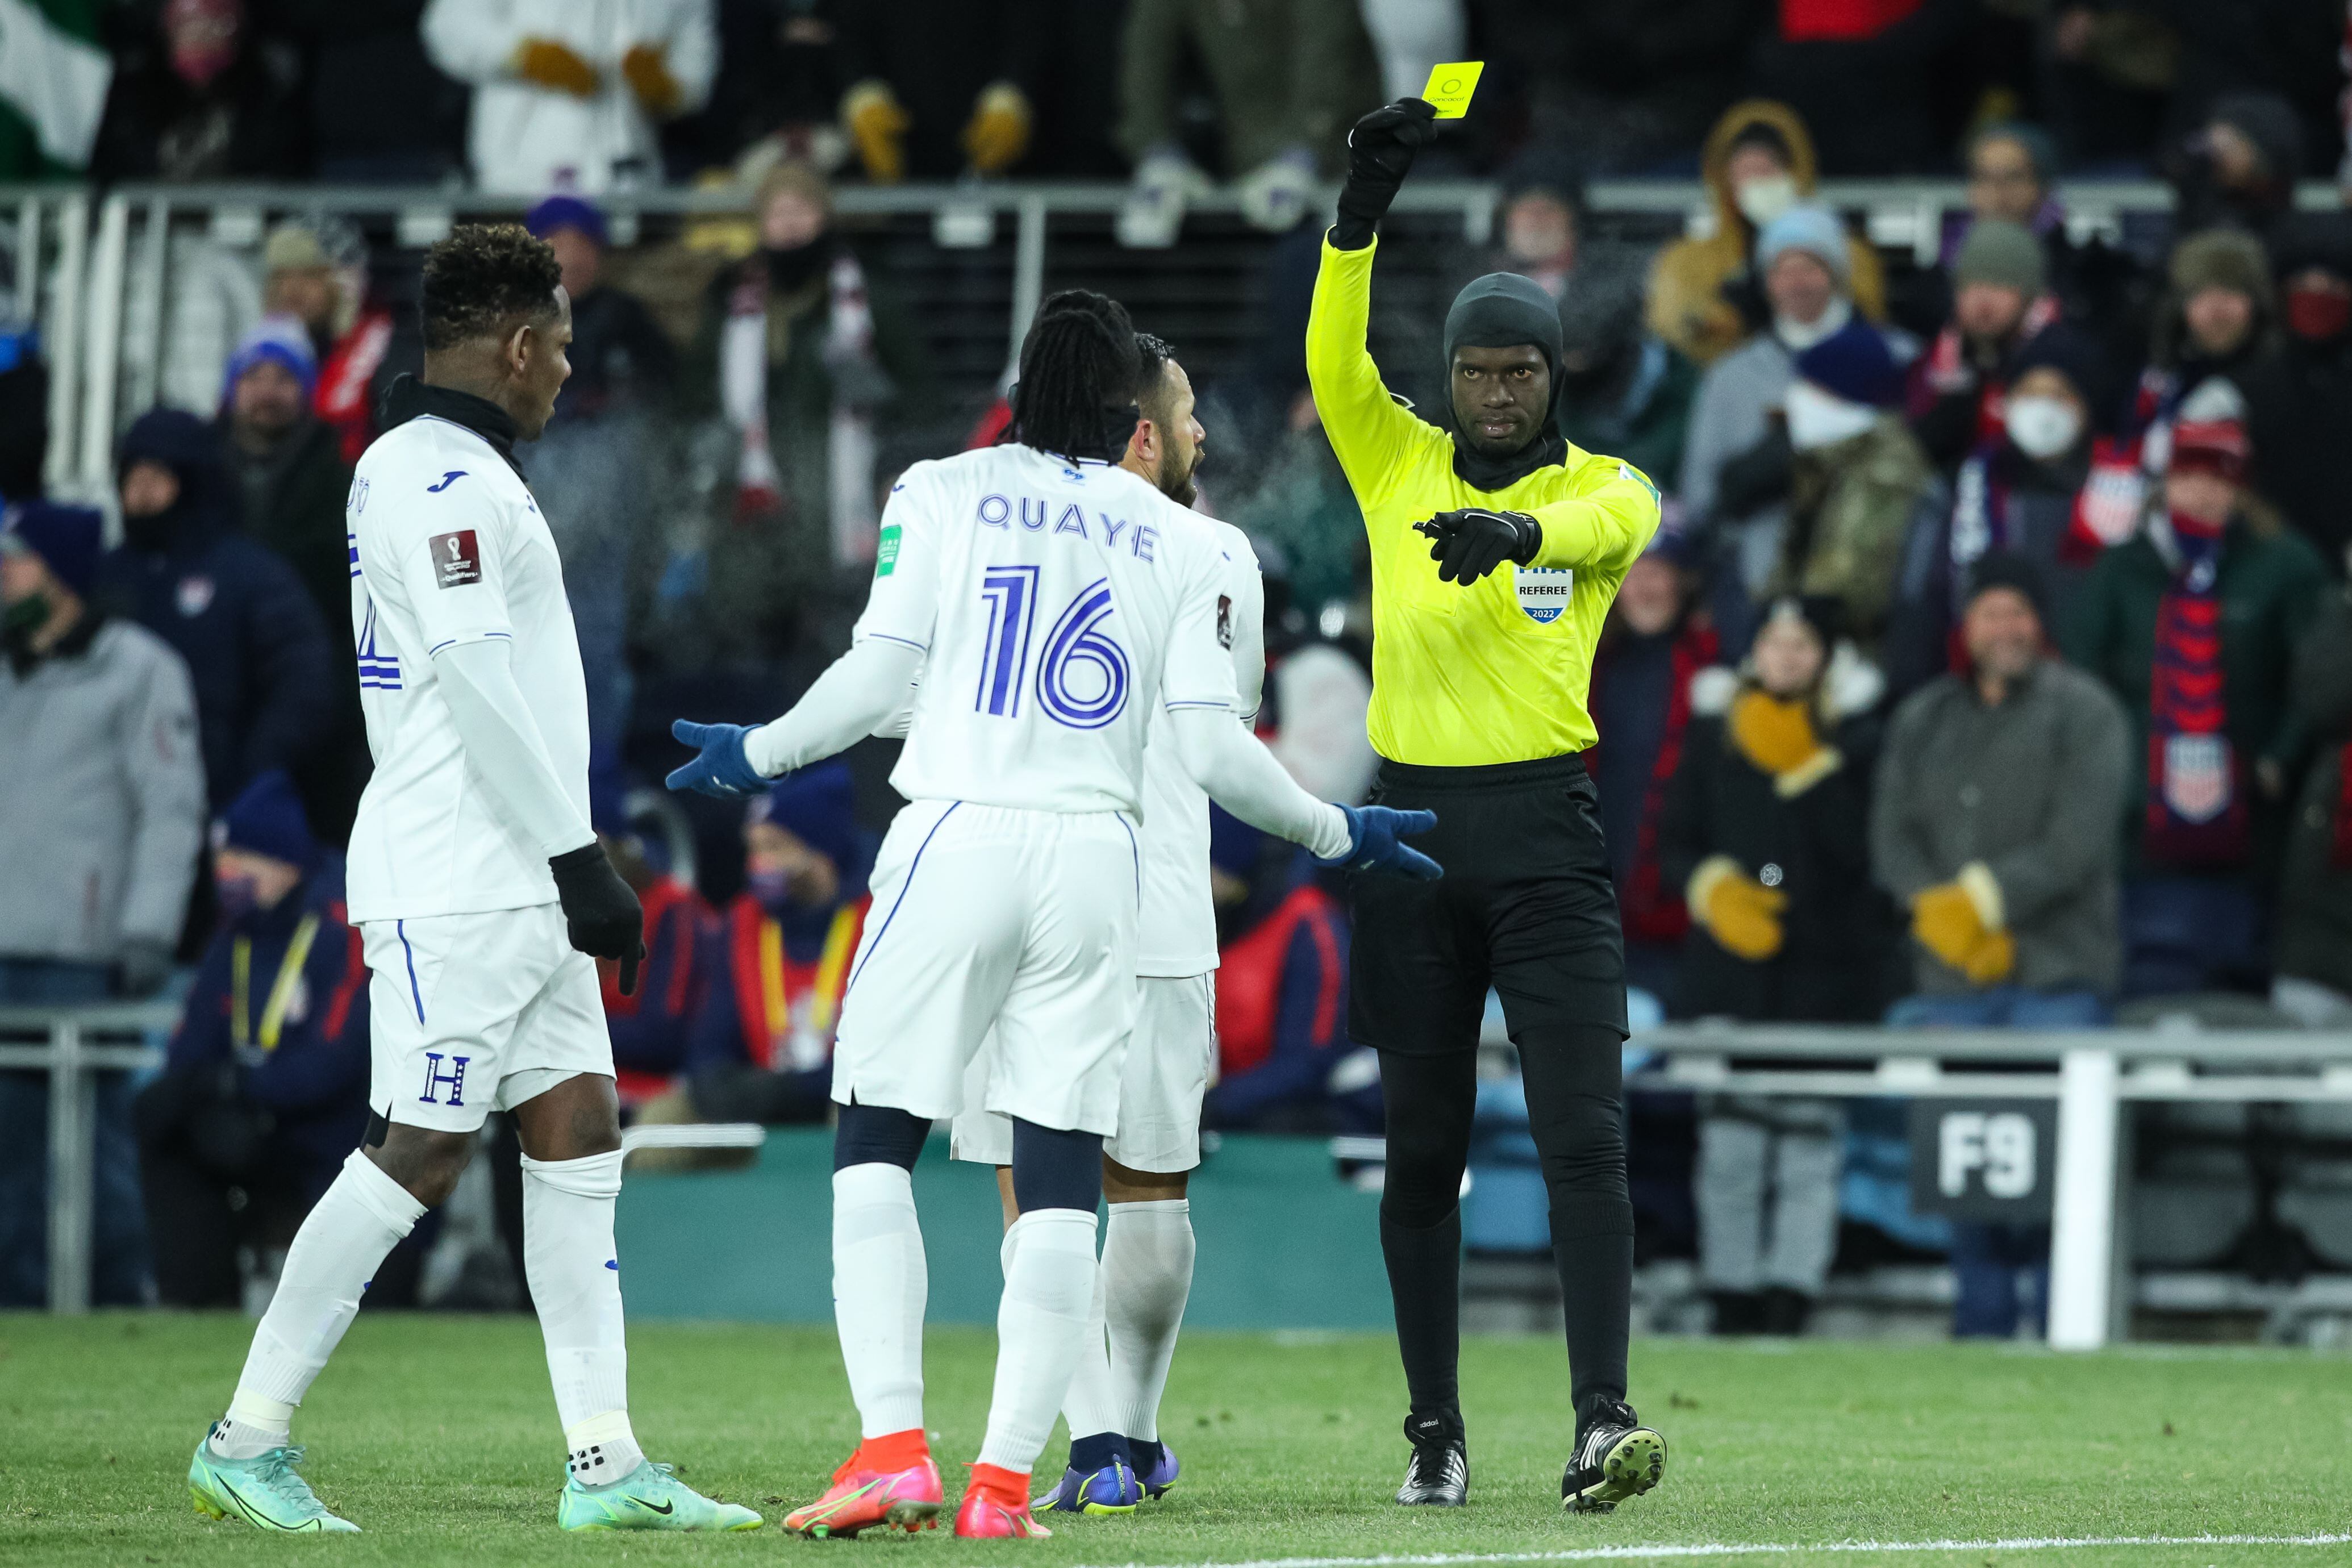 Honduras players get hypothermia during freezing World Cup loss to USA